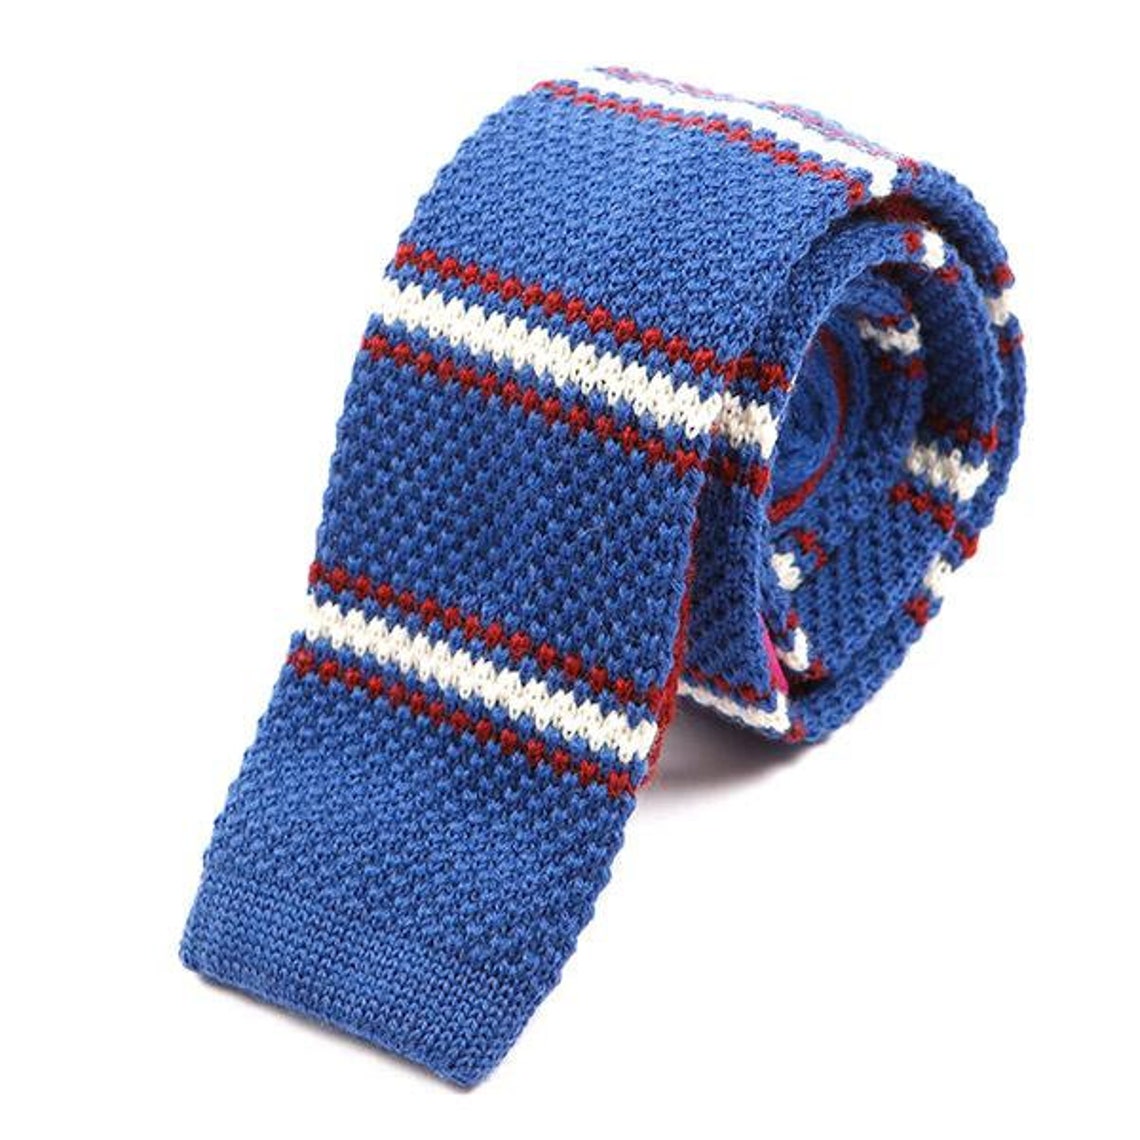 Striped Tie Knit Tie Navy Blue & Red Striped Knitted Tie One | Etsy